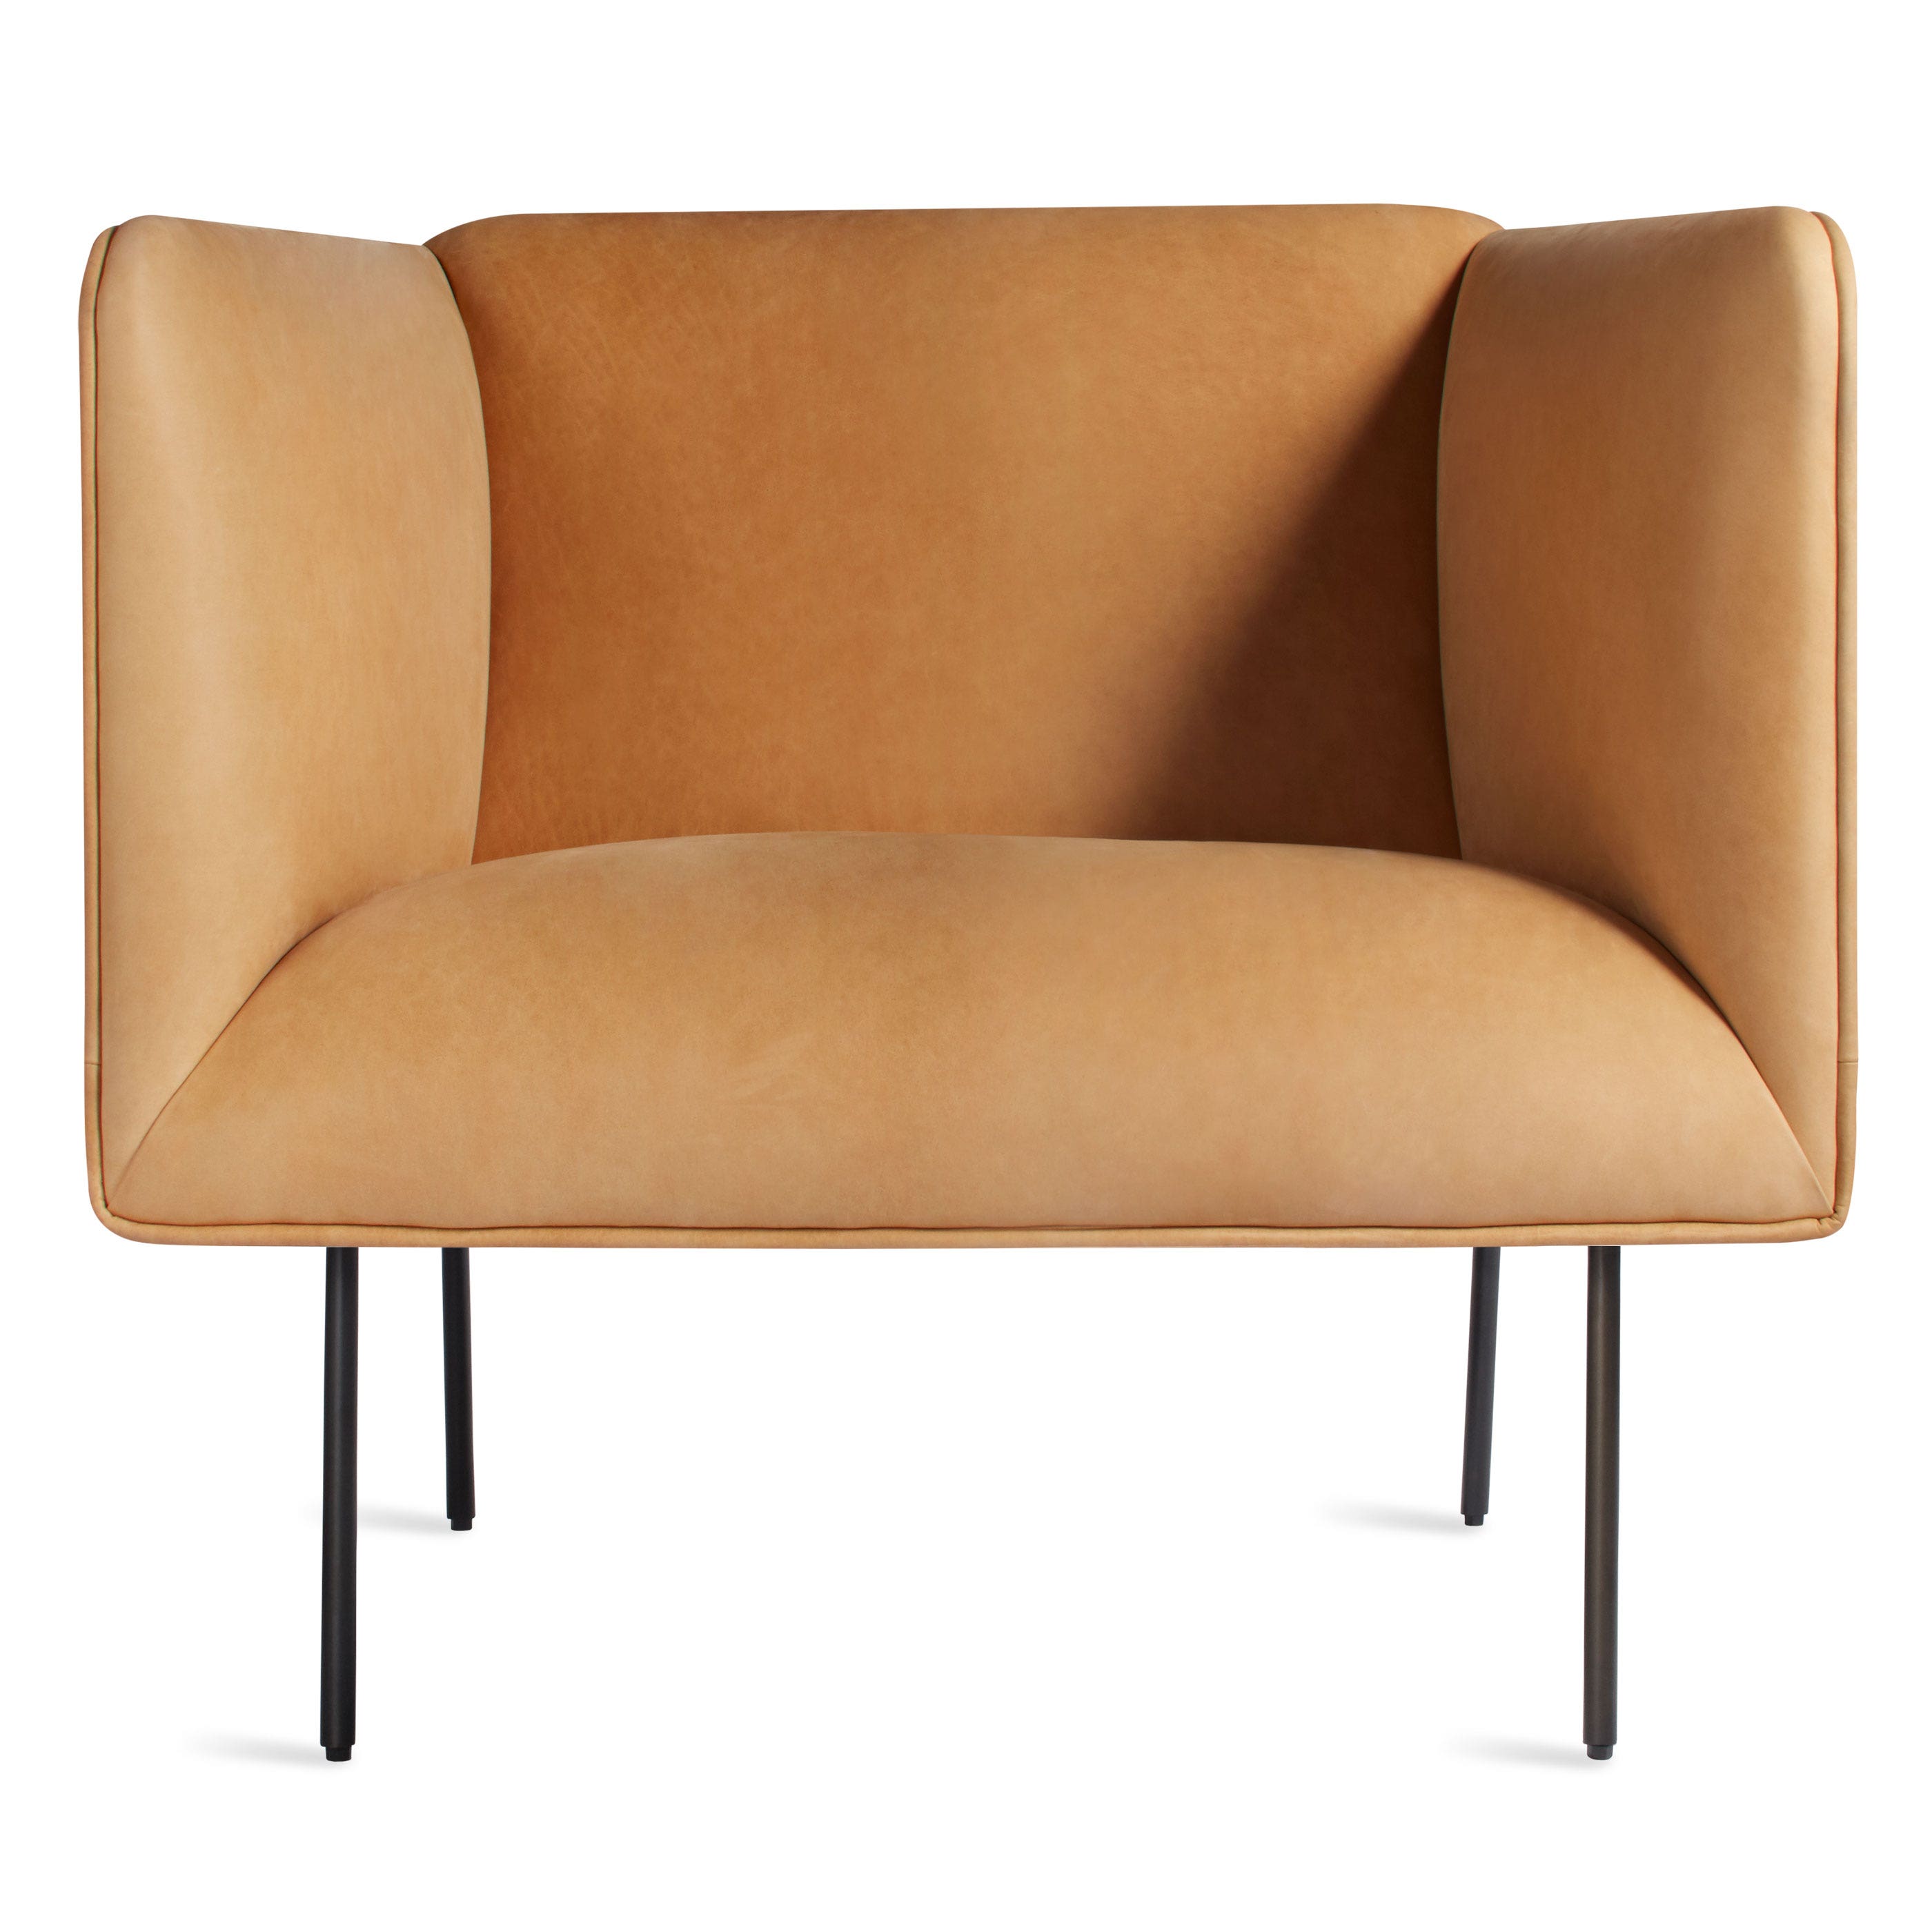 http://d2nfdohdbzm5u6.cloudfront.net/media/catalog/product/d/n/dn1_lngchr_ca_dandy-louge-chair-camel-leather.jpg